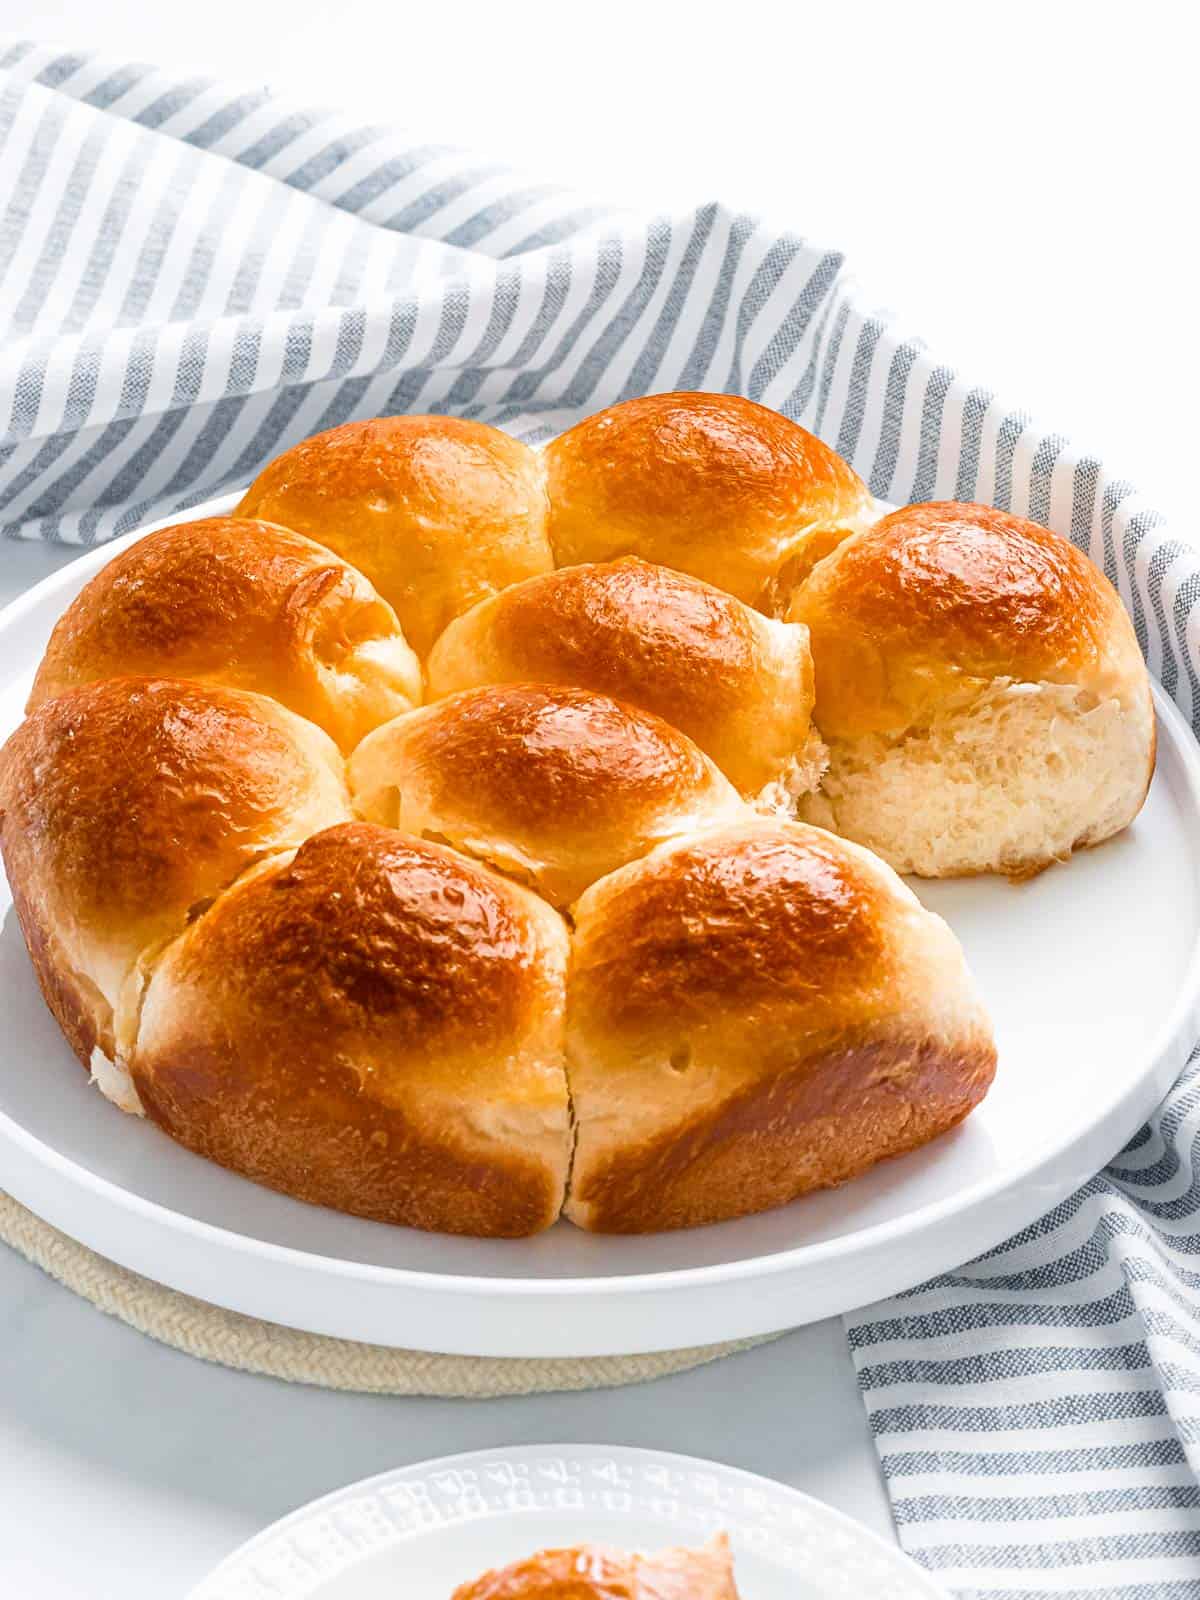 Soft and fluffy brioche rolls with a golden brown crust on a white plate.